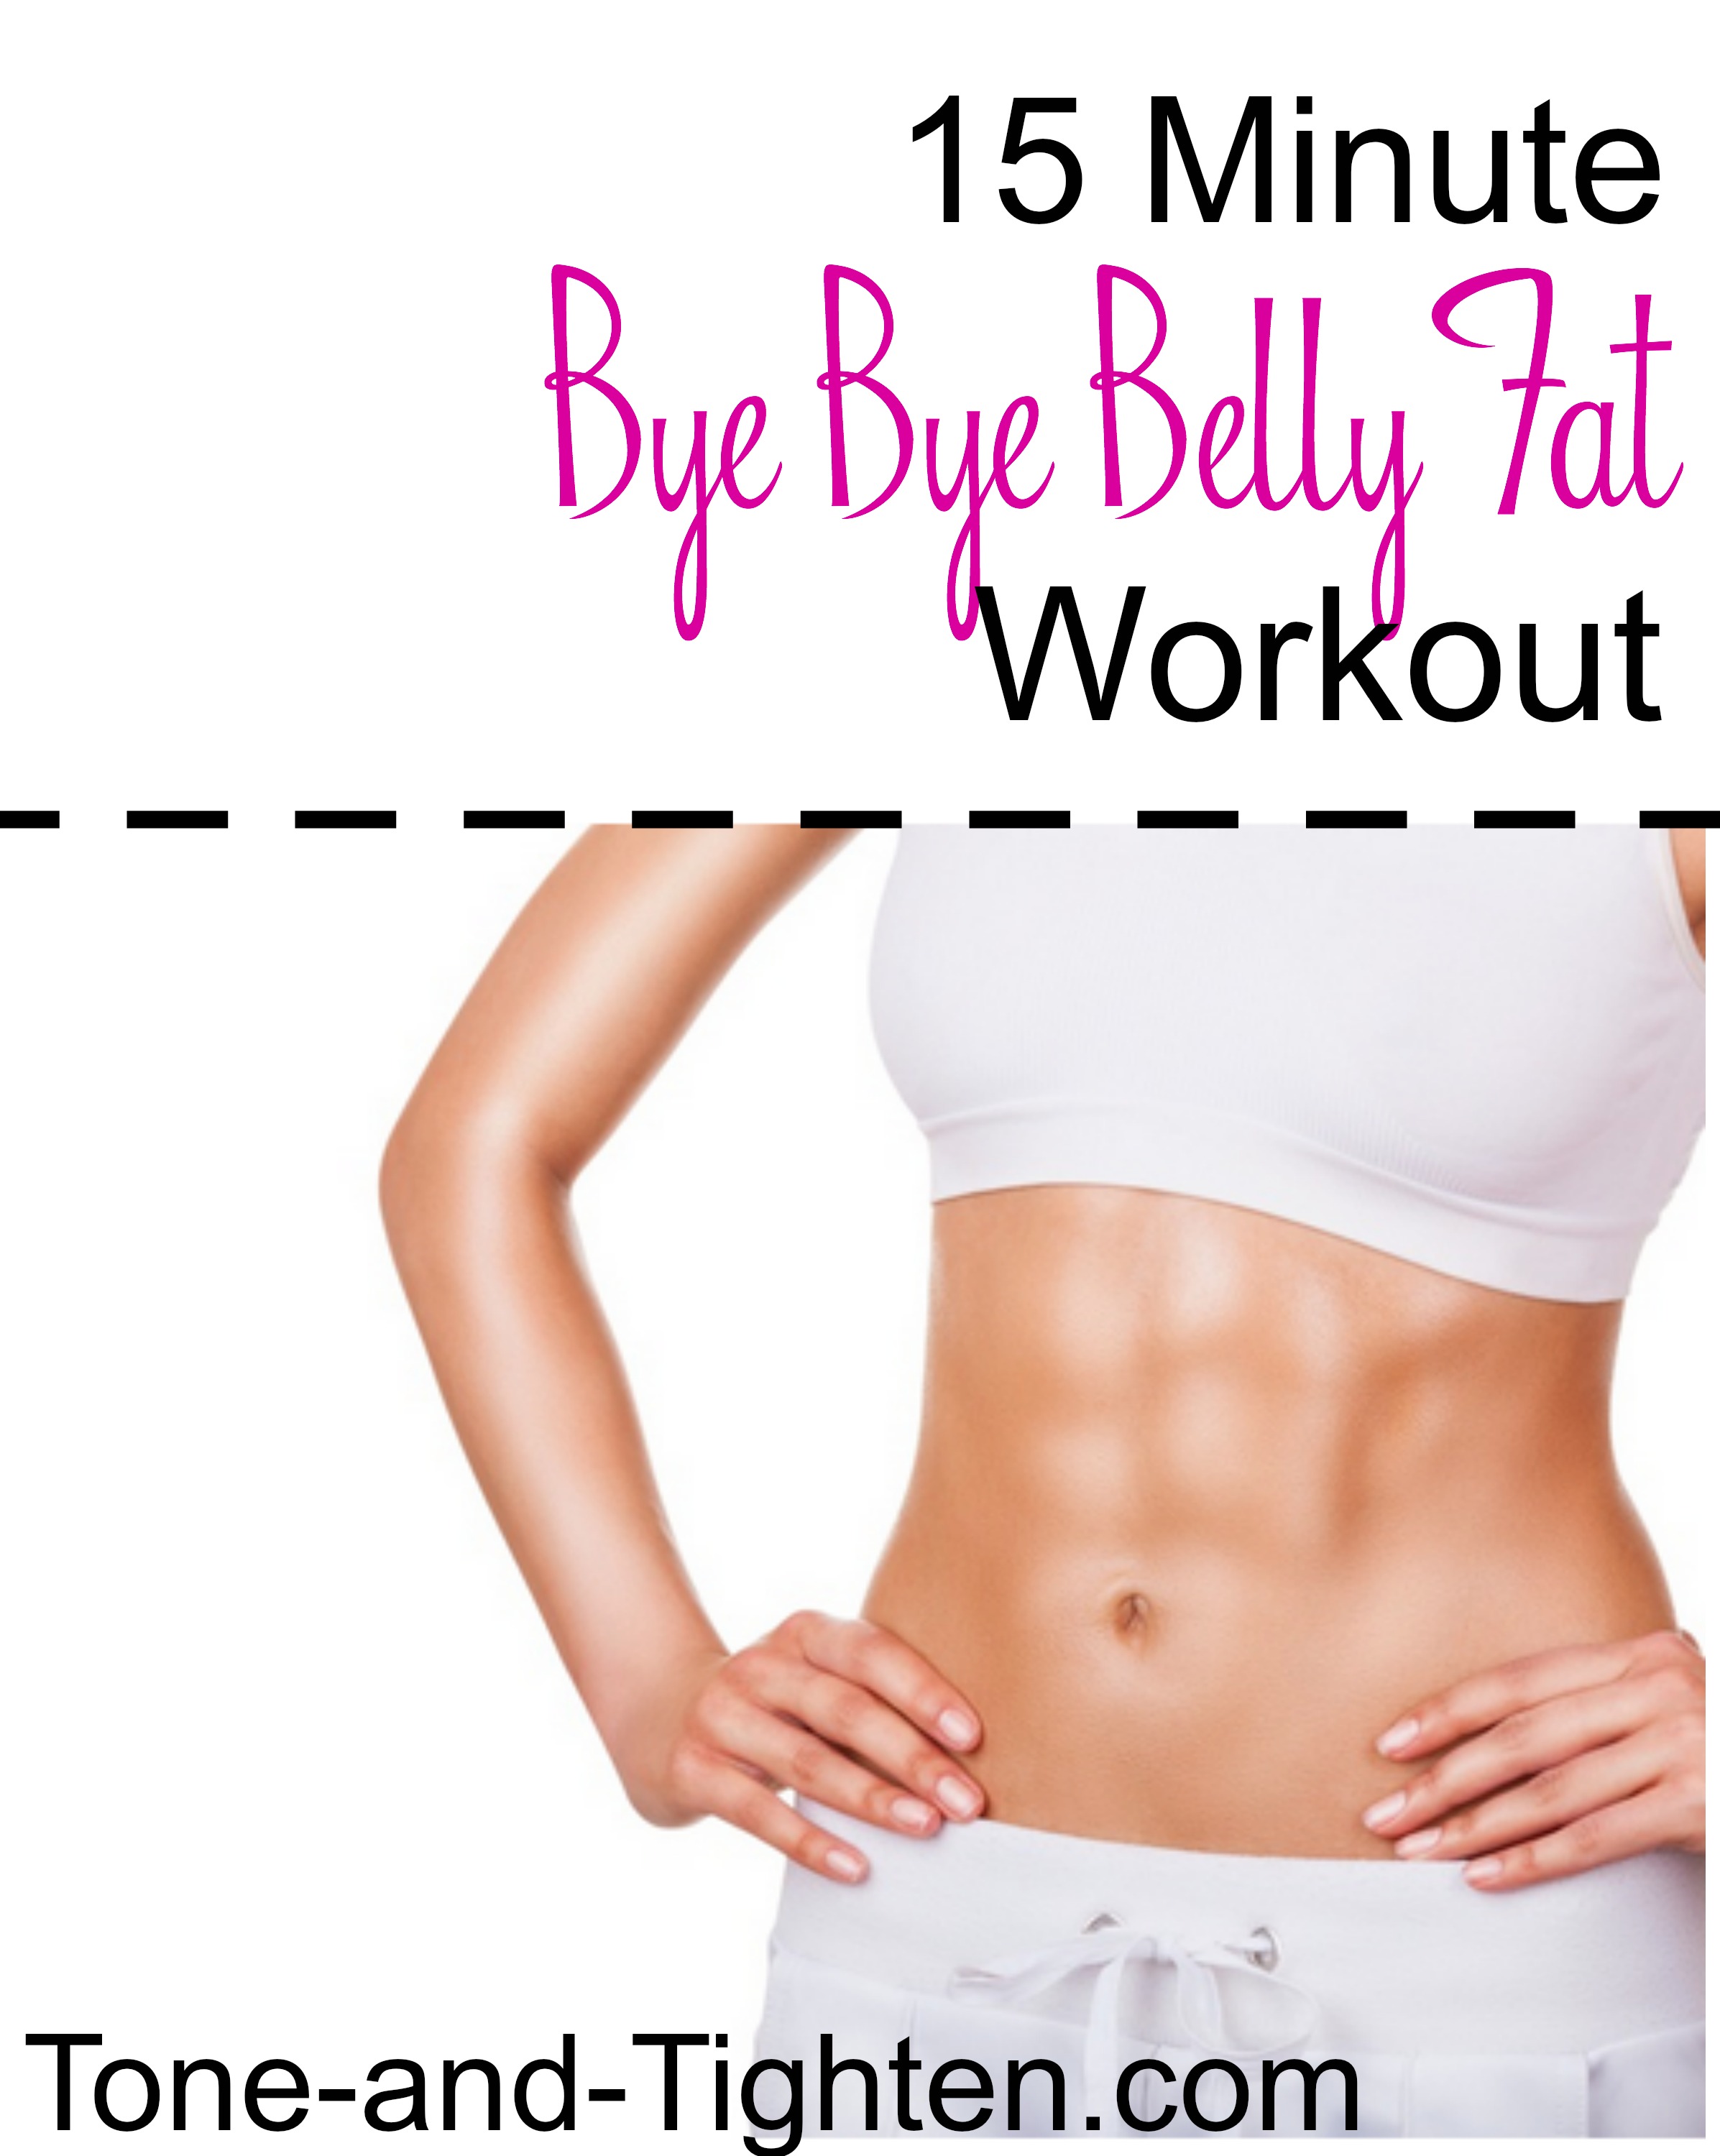 15 Minute No More Belly Fat Cardio Workout